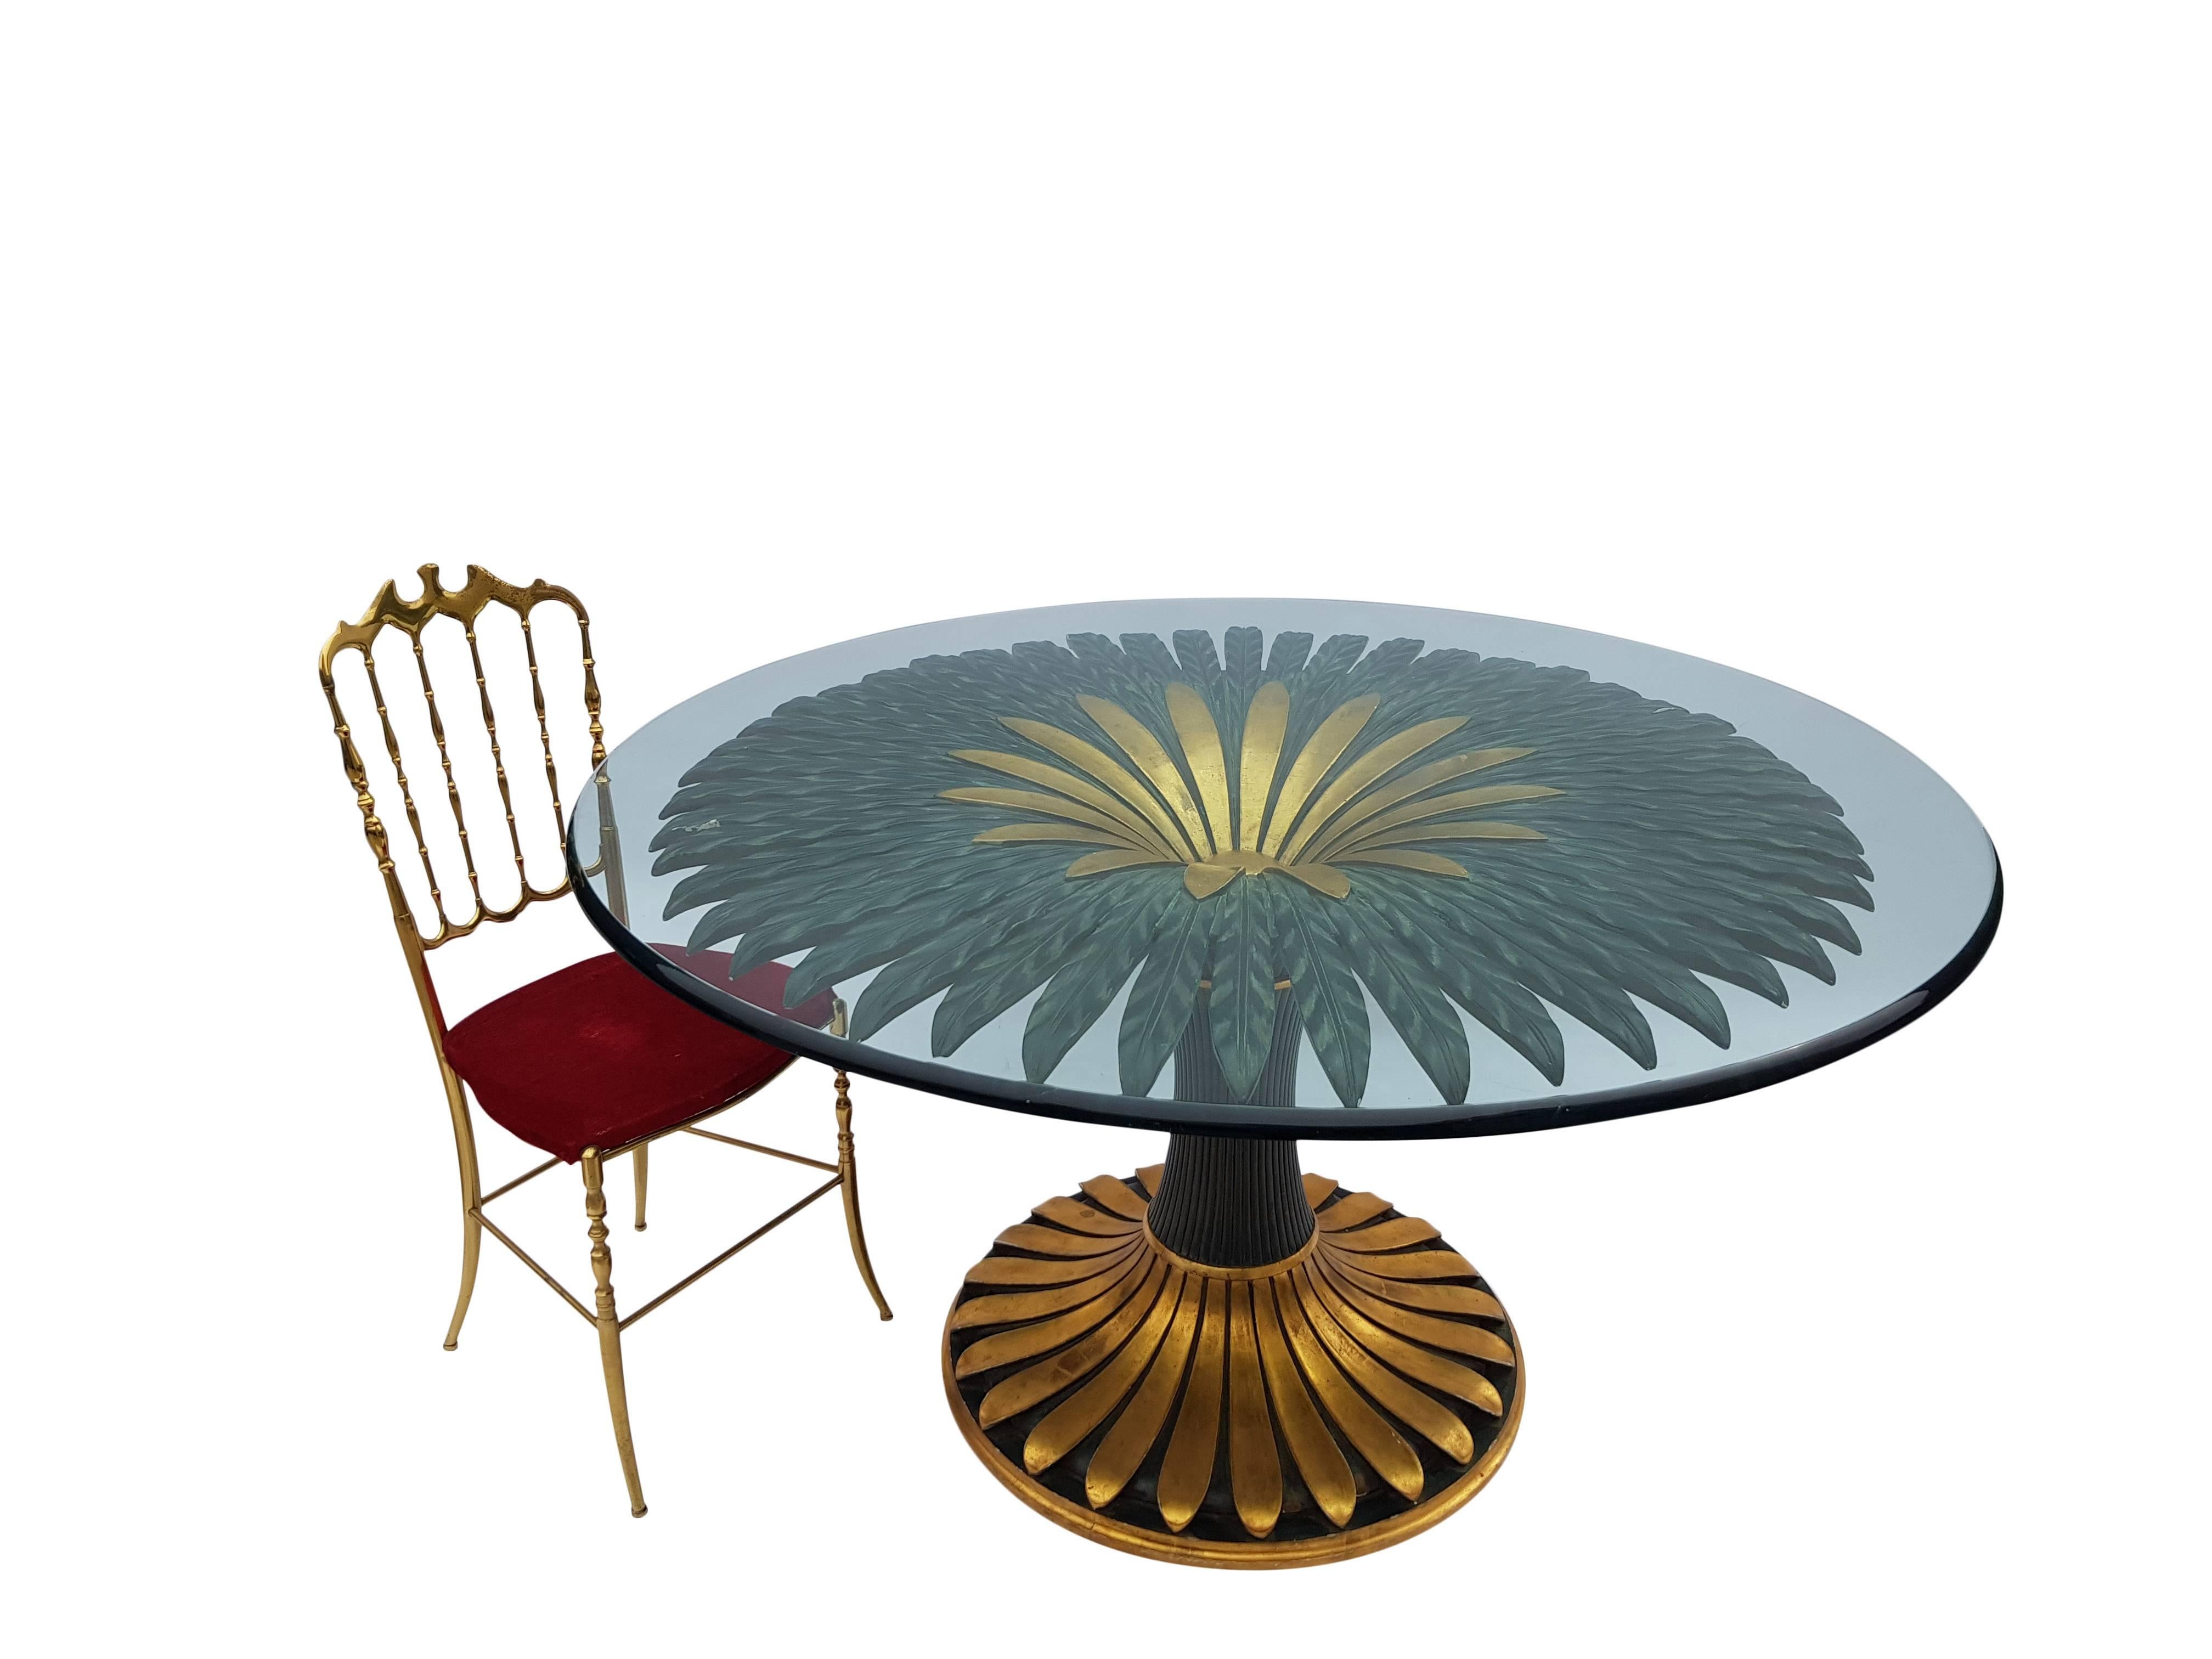 Stunning Italian hand-carved wooden dining table in green and gold.
The table has a thick high quality glass (2cm)
Beautiful to combine in an interior with Willy Rizzo, Maison Jansen, Romeo Rega etc.